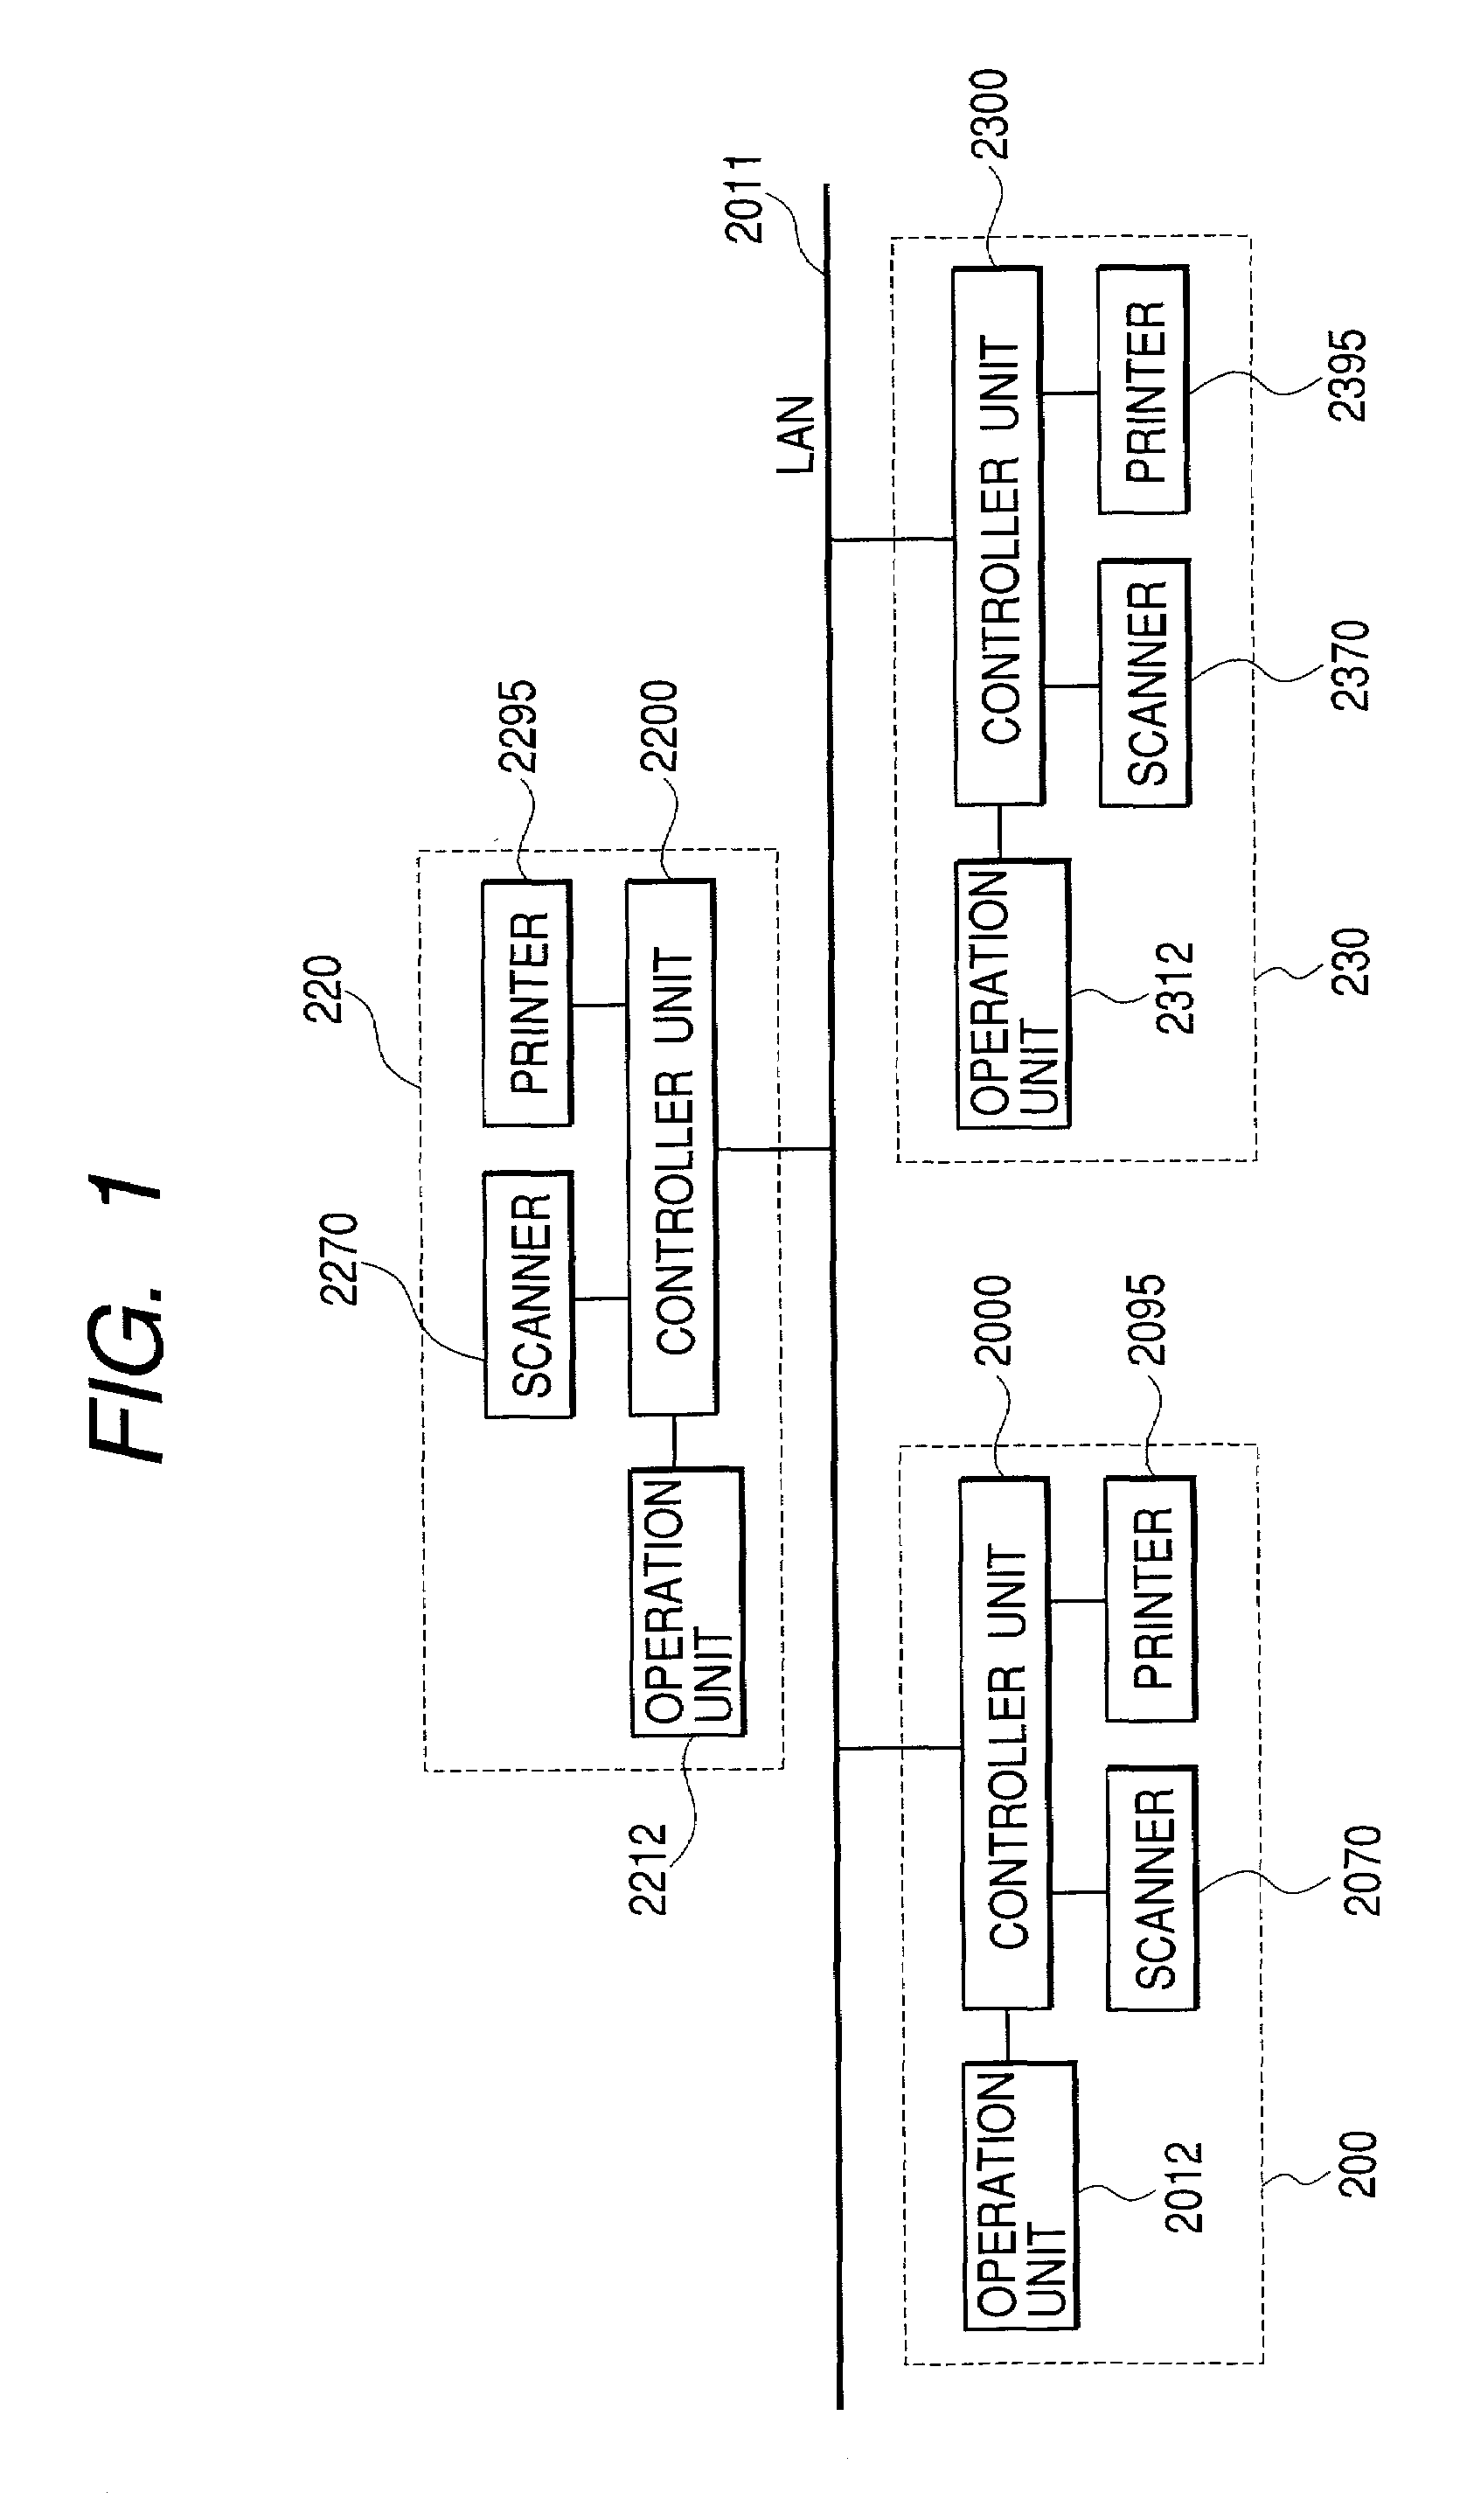 Image processing device, information processing method and computer-readable storage medium storing a control program for performing an operation based on whether a function is being set or requested to be set